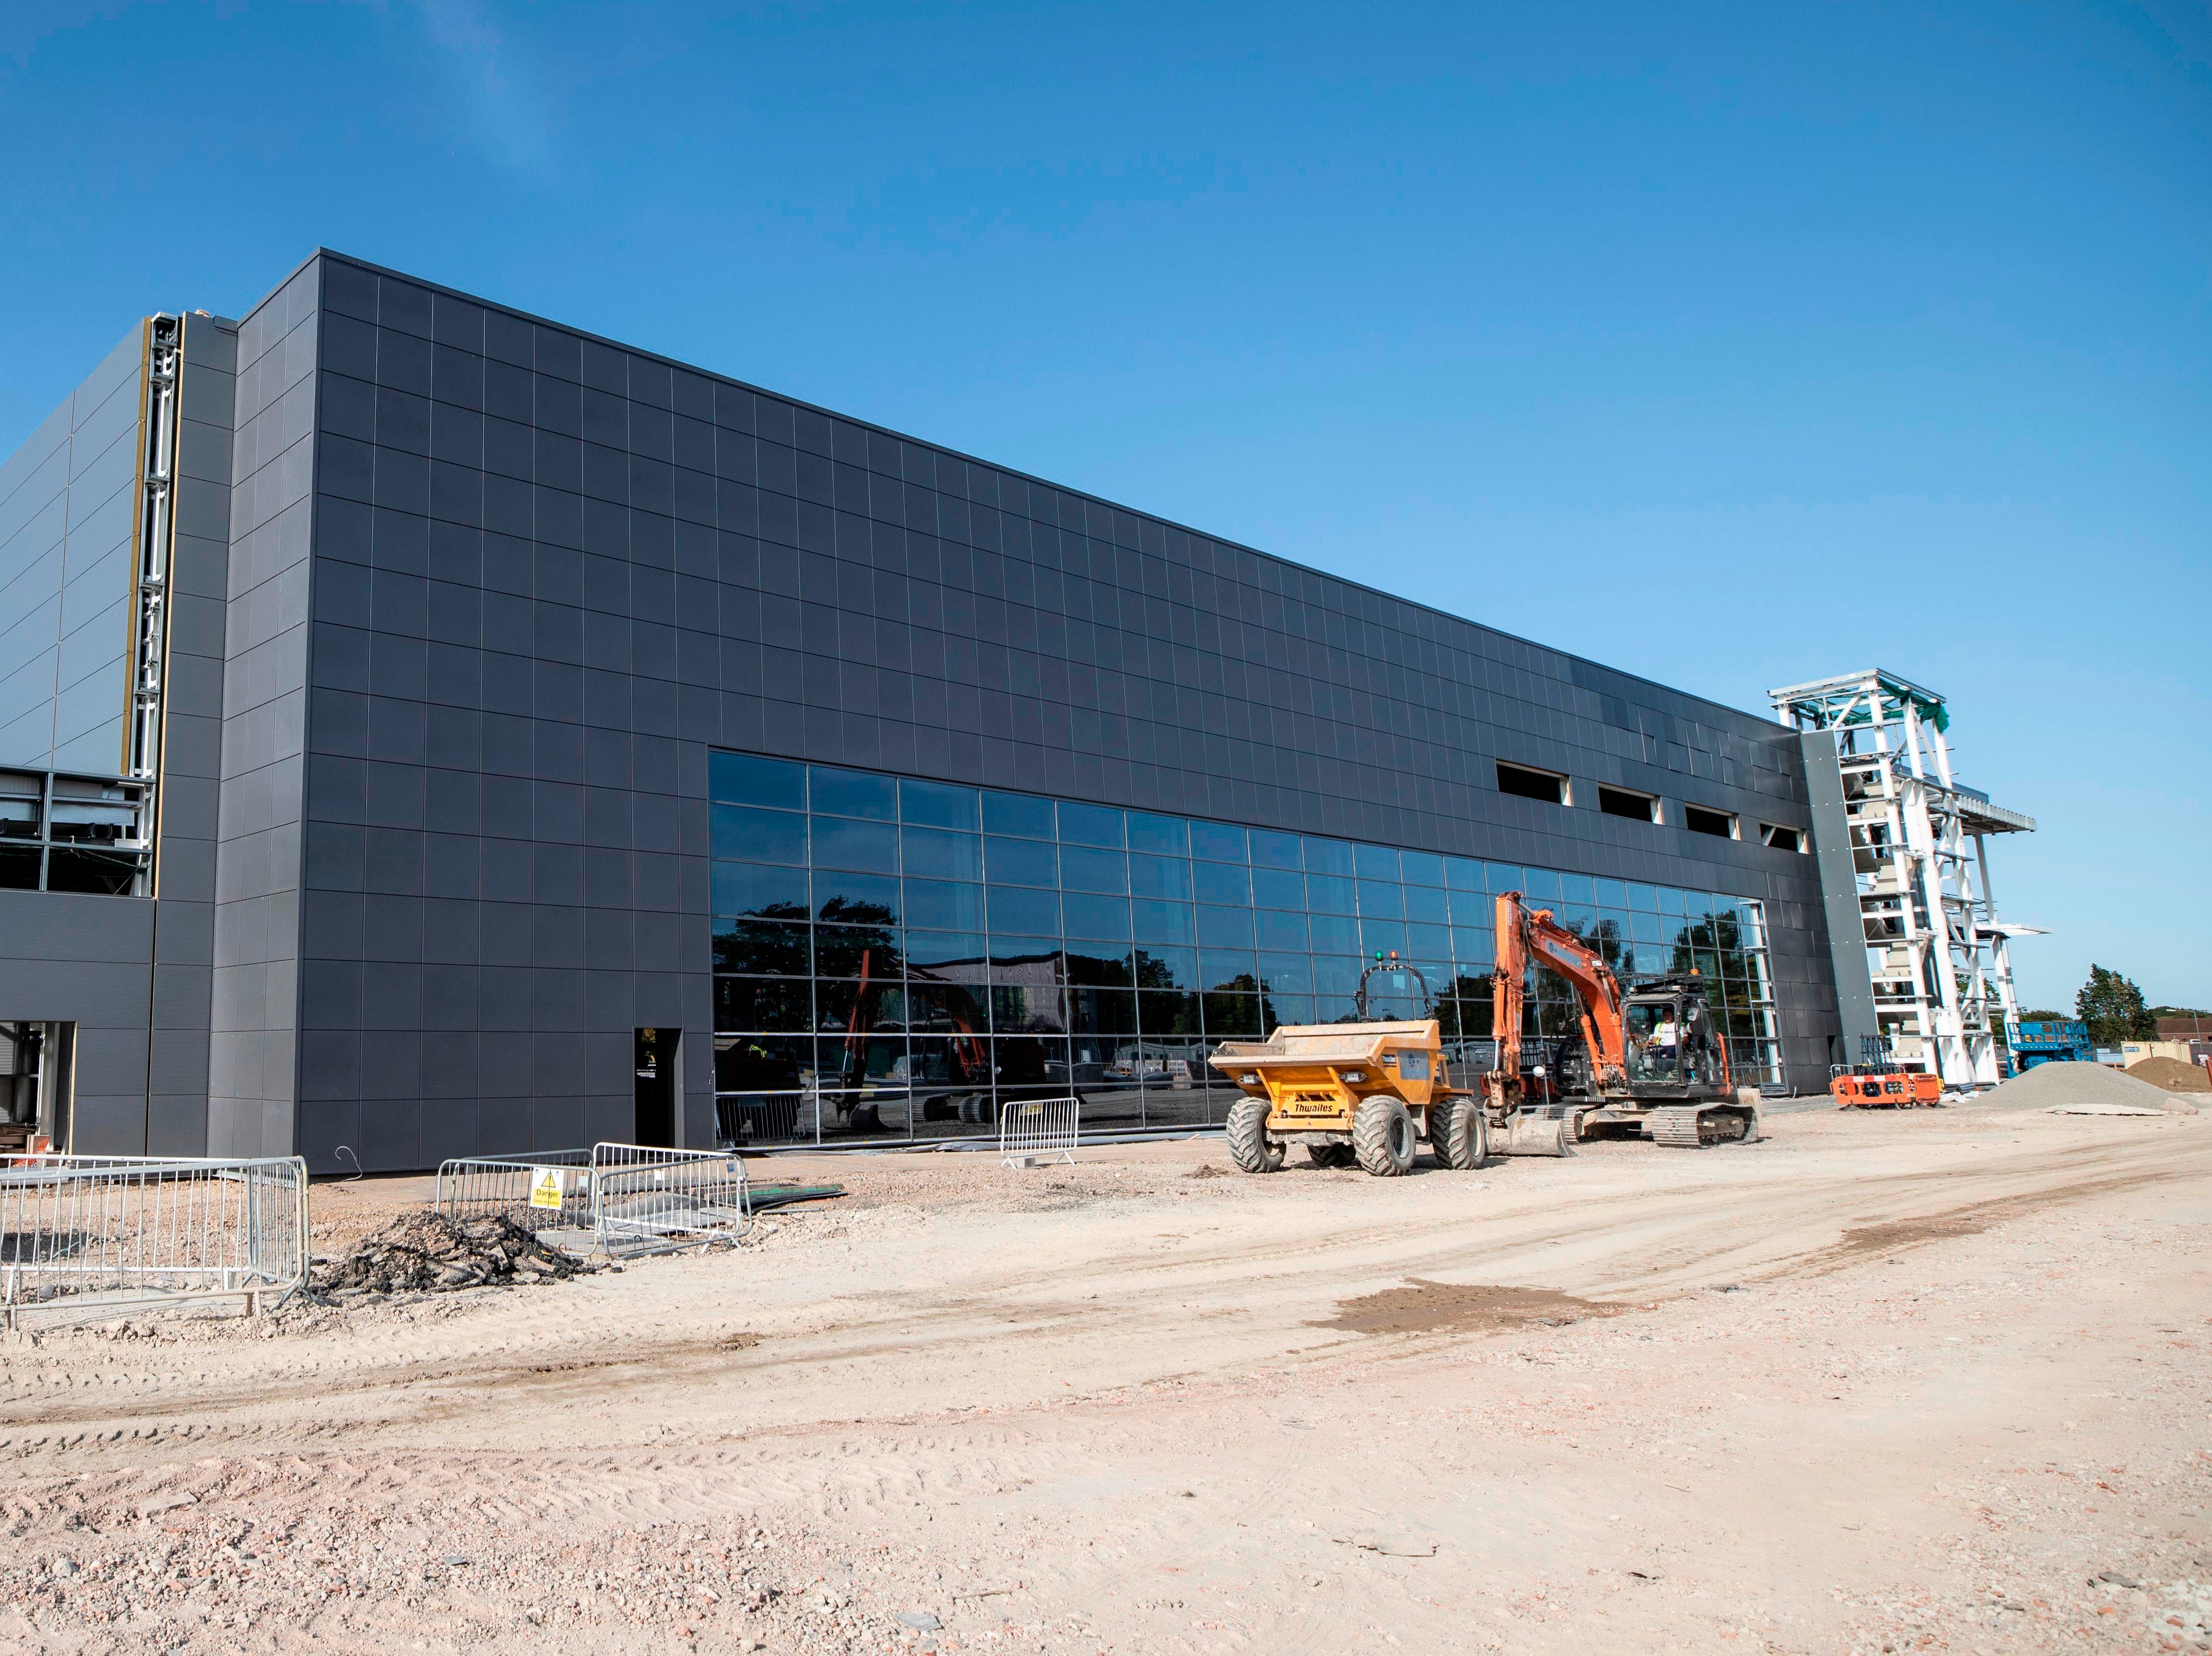 The Vaccines Manufacturing Innovation Centre, set to be completed in spring 2022, has been put up for sale